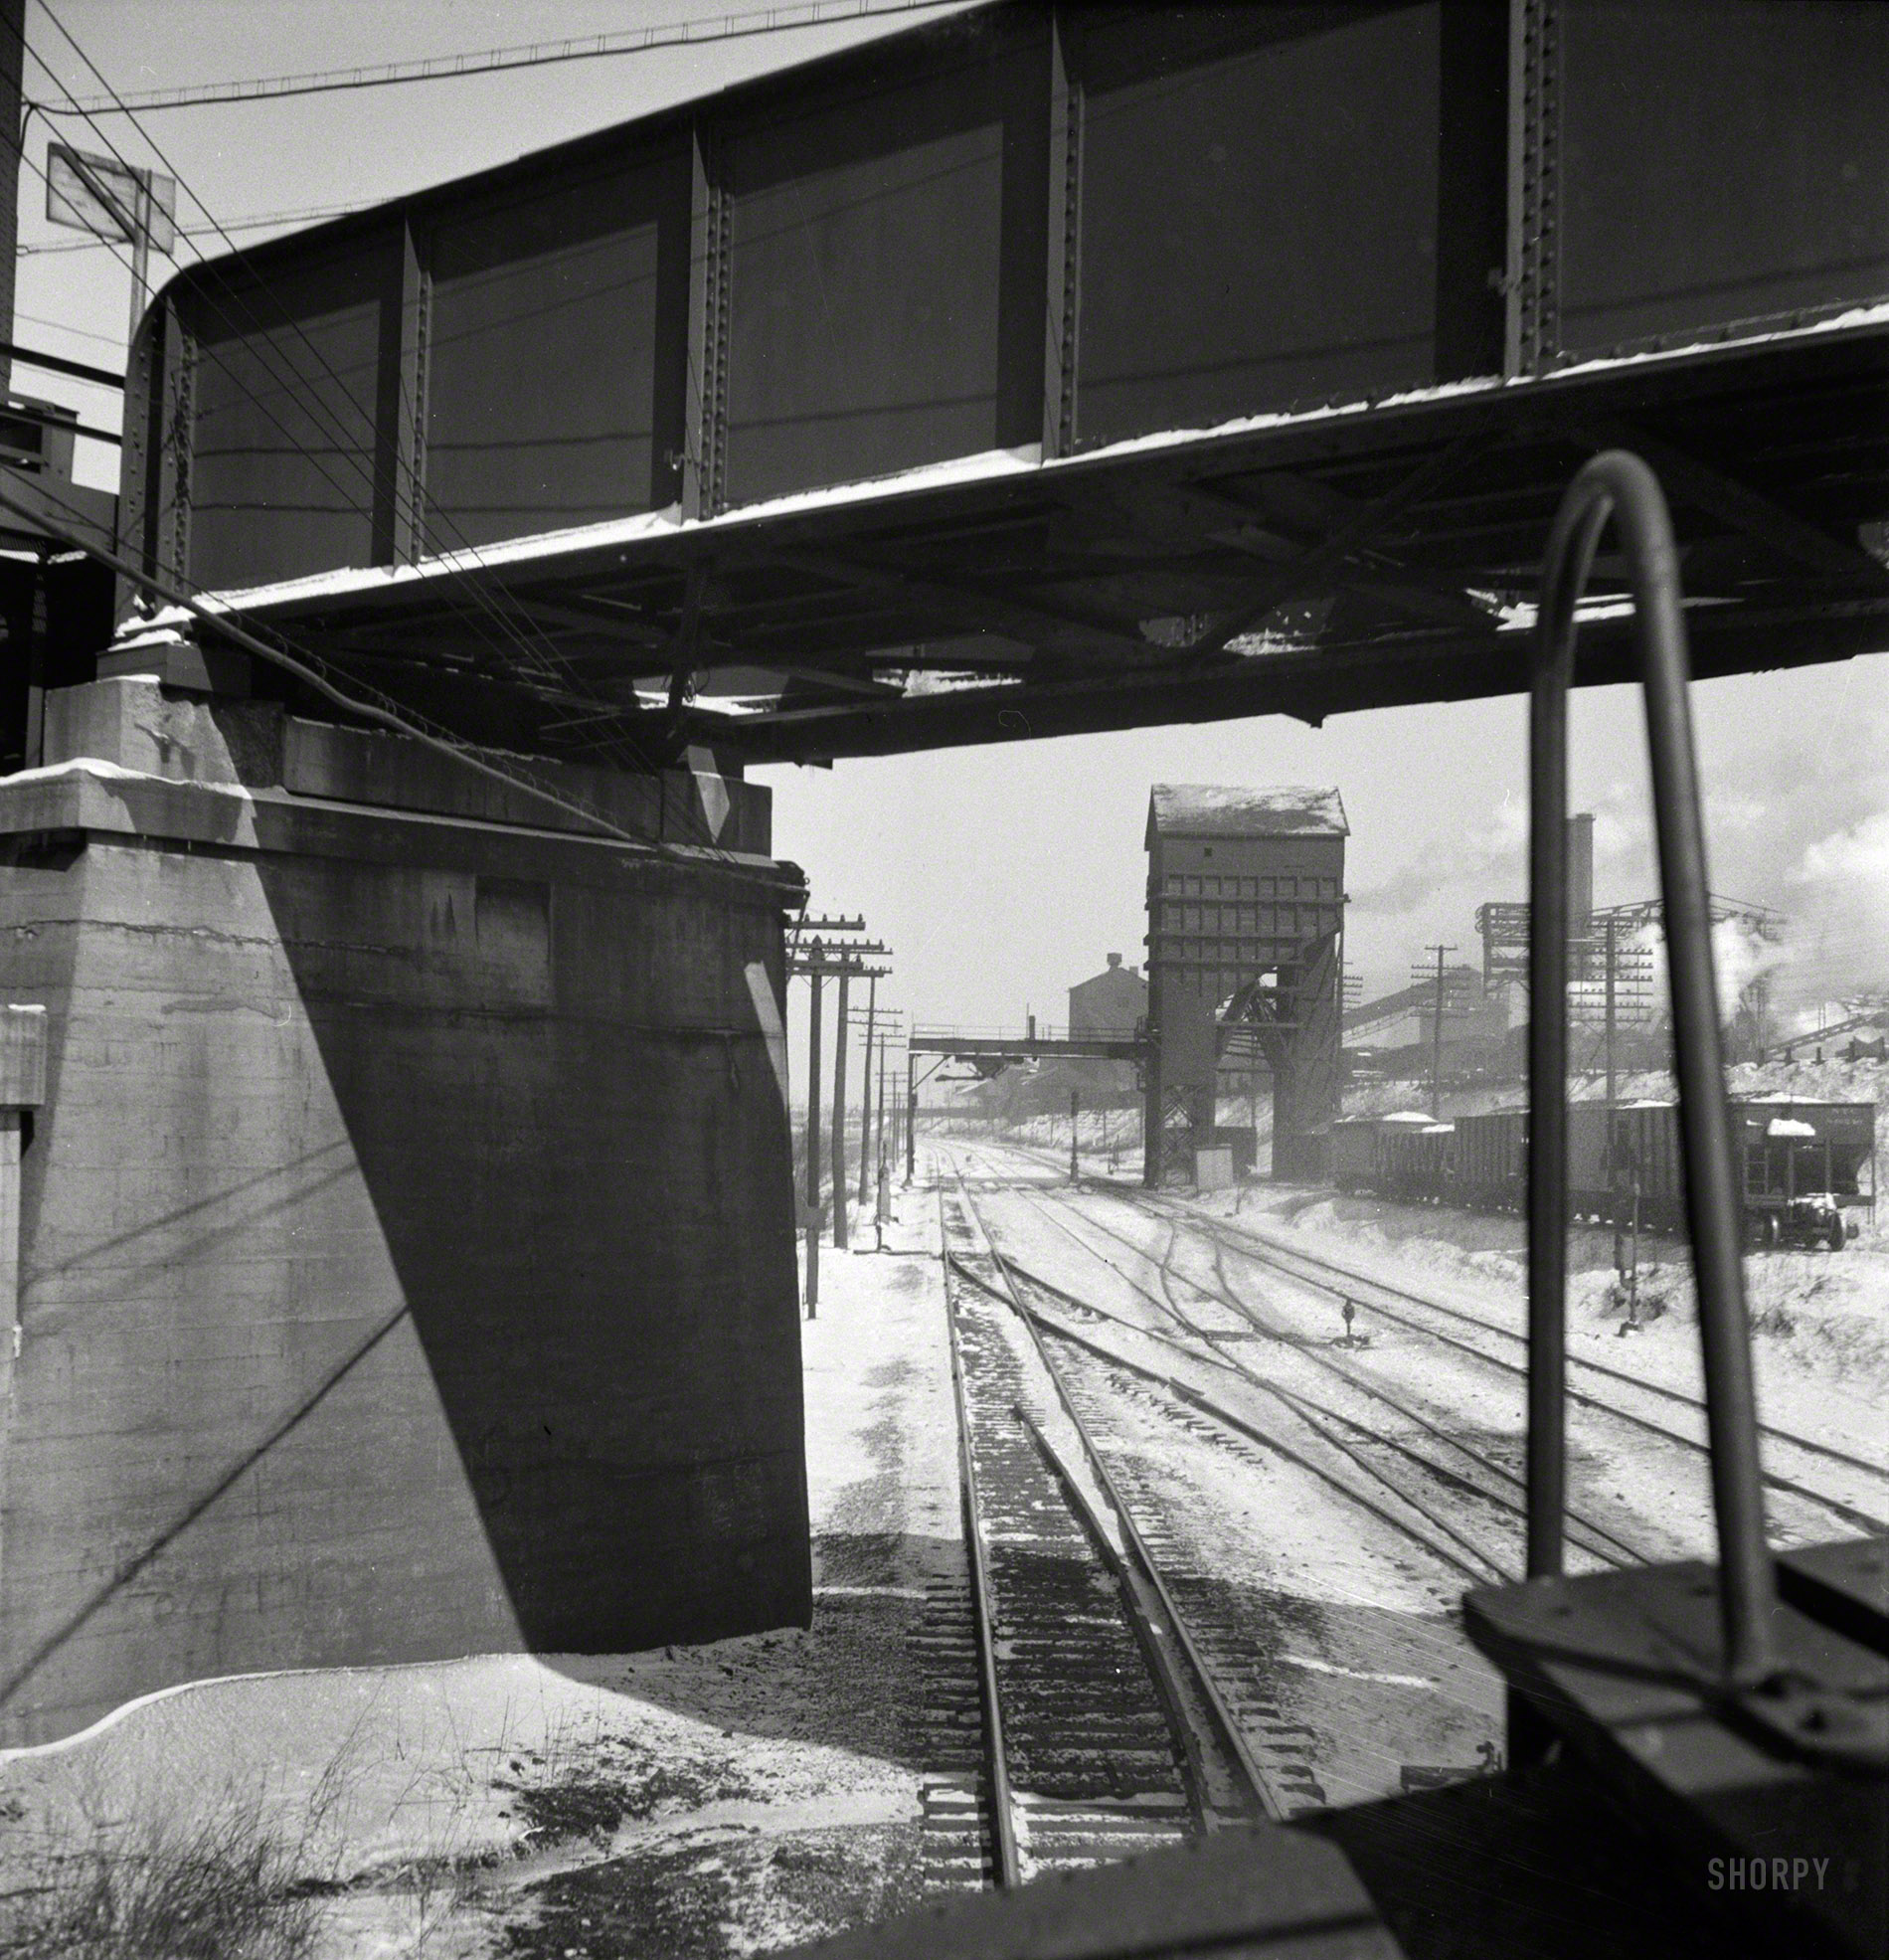 March 1943. "Between Lockport and Joliet, Illinois, along the Atchison, Topeka & Santa Fe." Photo by Jack Delano, Office of War Information. View full size.